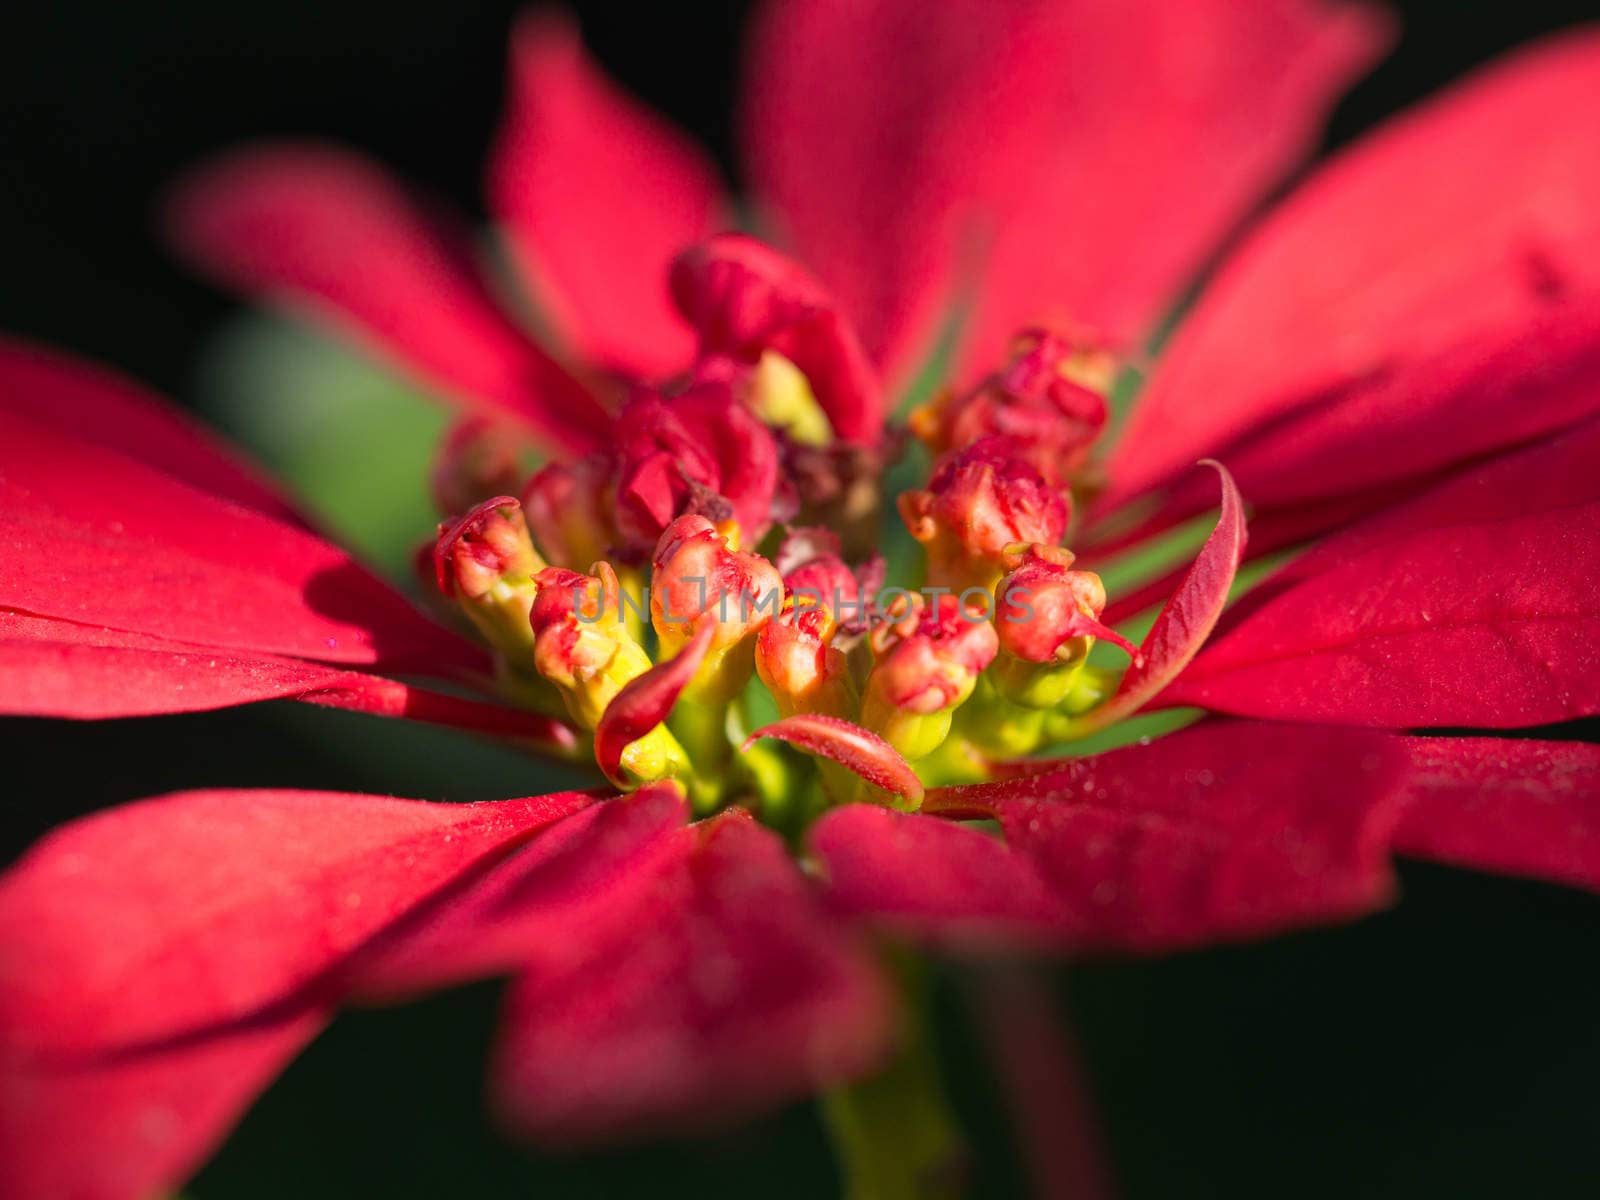 Red Poinsettia Close-up / macro shot on blurry green background